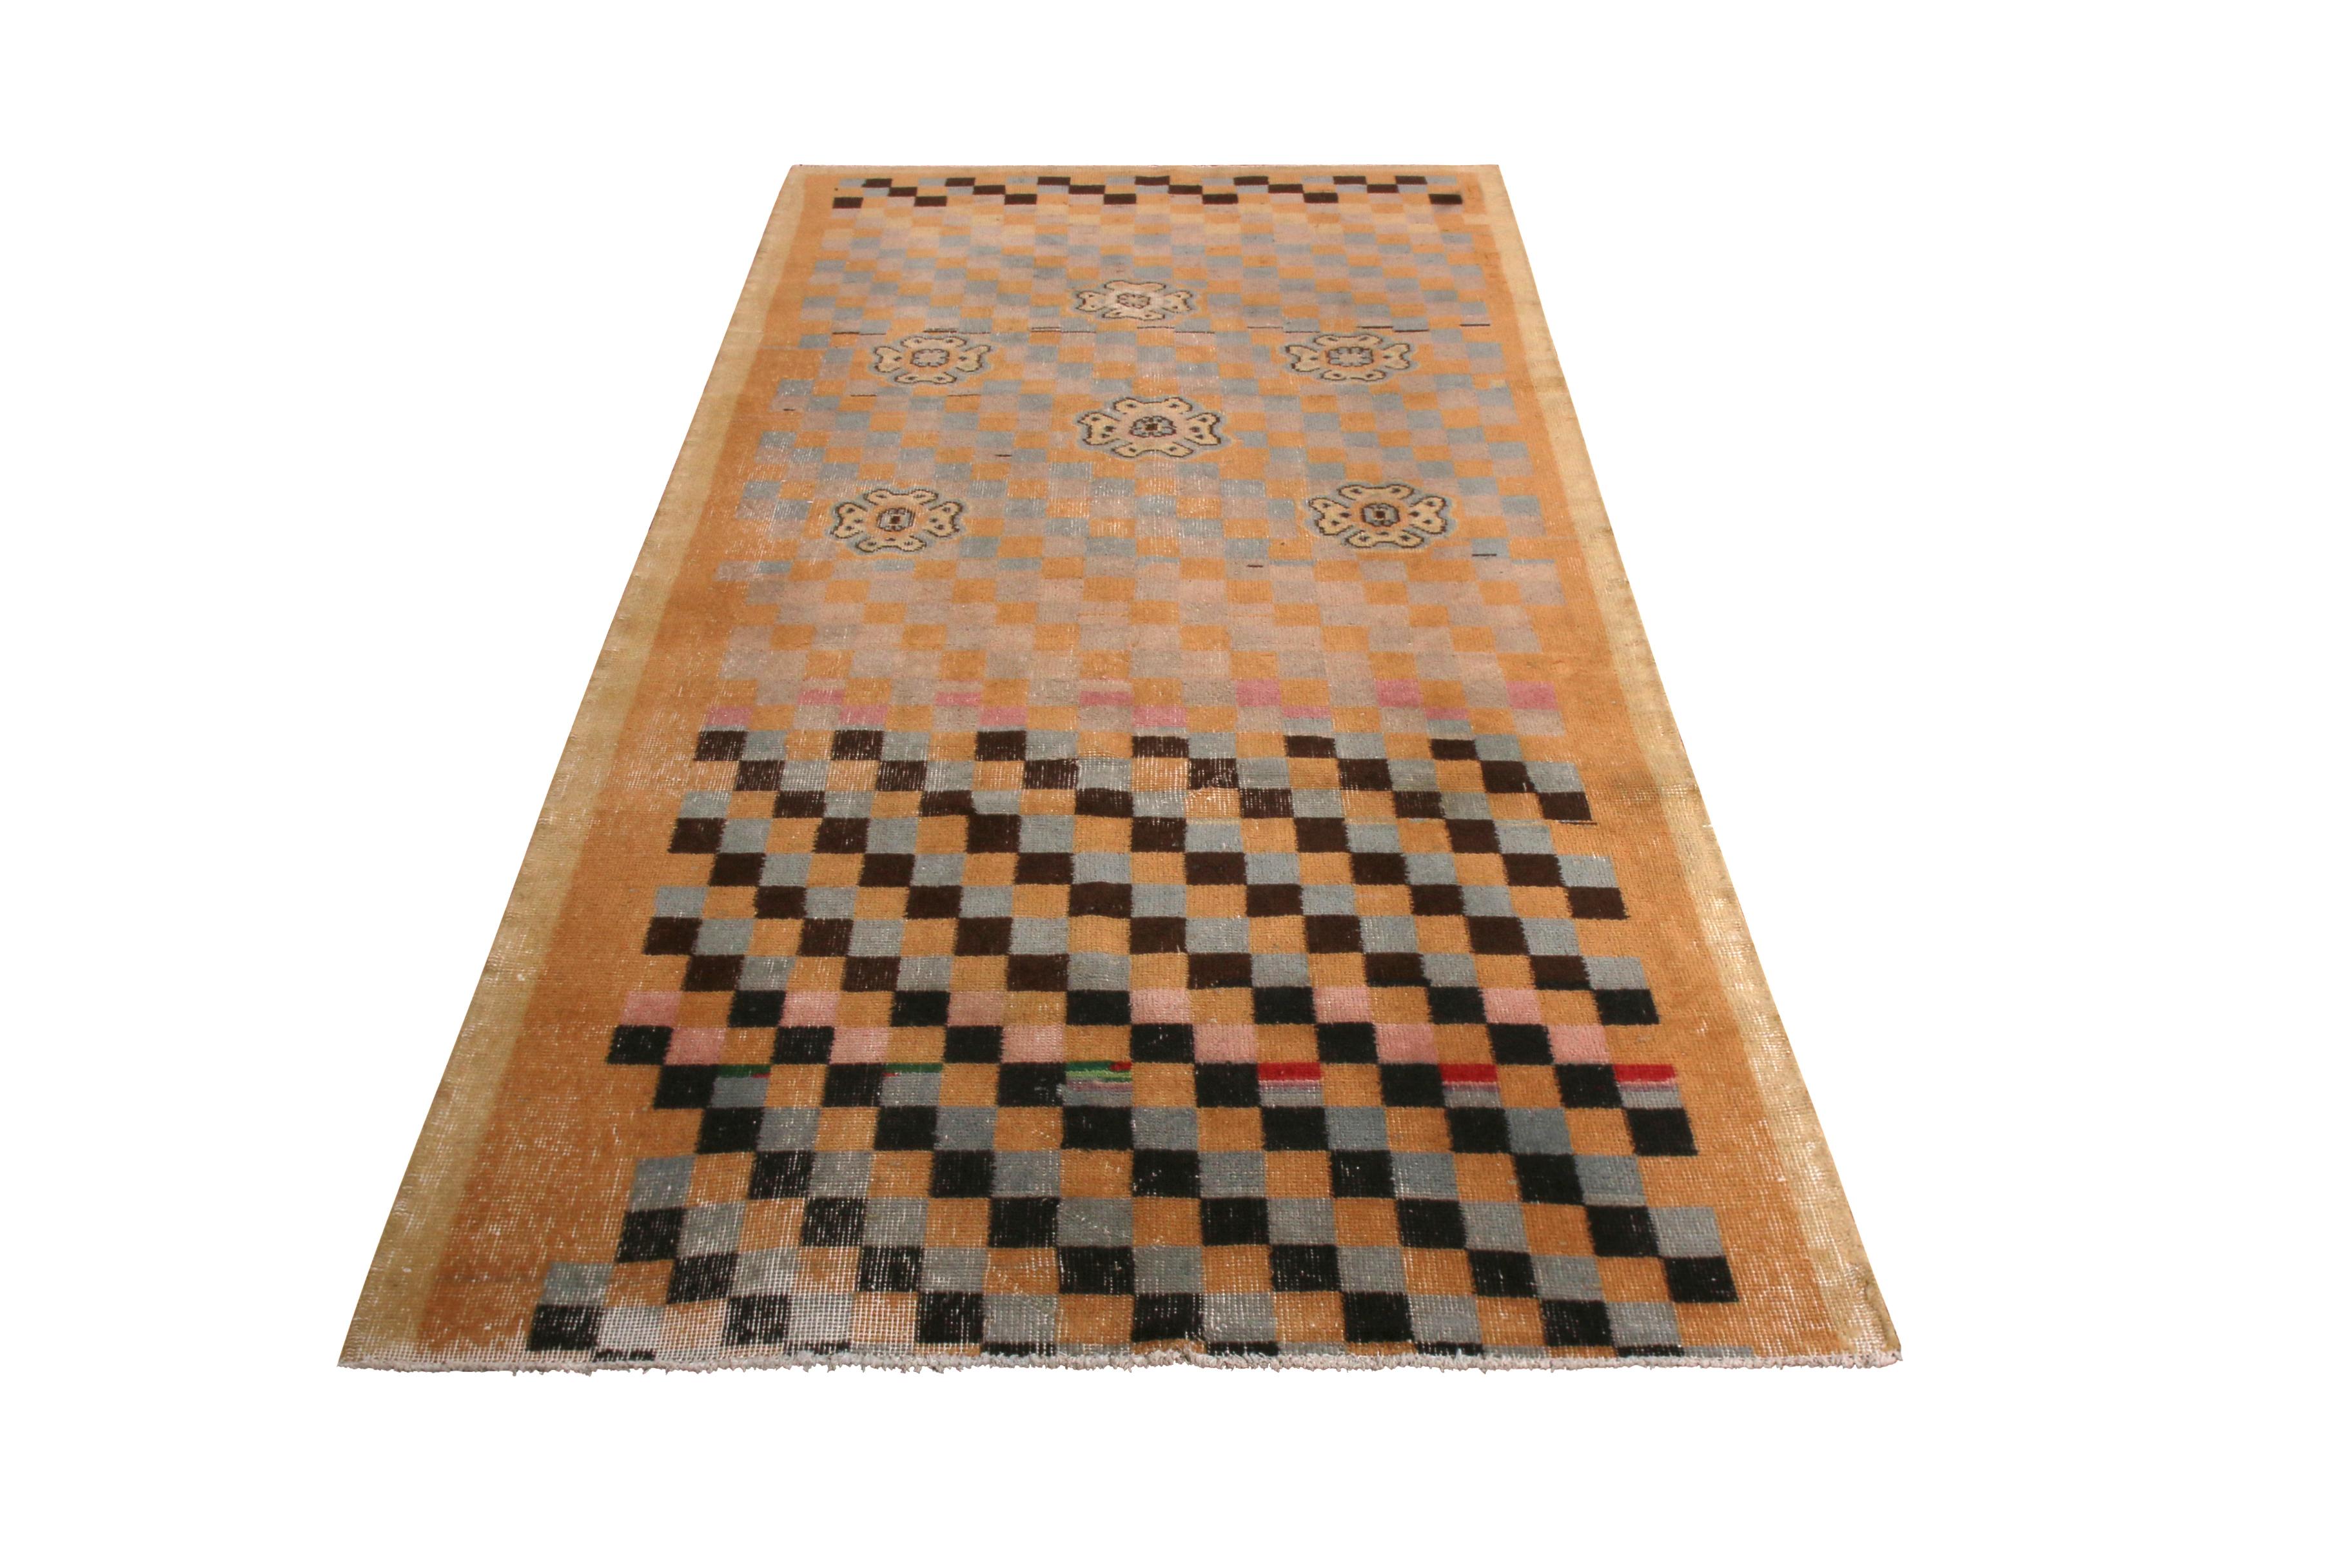 Hand knotted in Turkey originating between 1960-1970, this vintage midcentury wool rug is the latest to join our midcentury Pasha collection, celebrating Turkish icon and multidisciplinary designer Zeki Müren with our team’s hand picked favorites